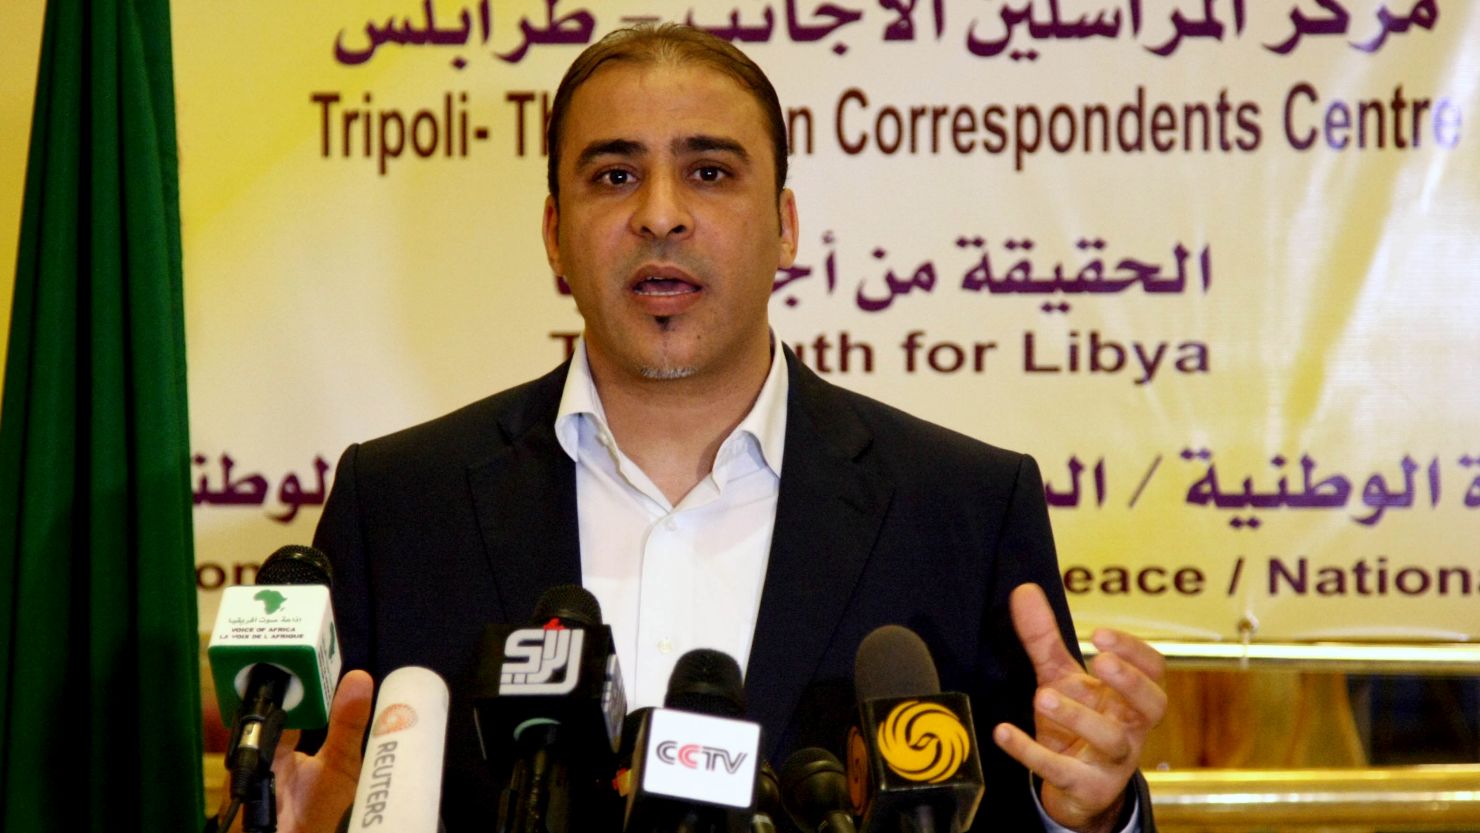 Moussa Ibrahim speaks at a press conference in Tripoli, Libya, in 2011.